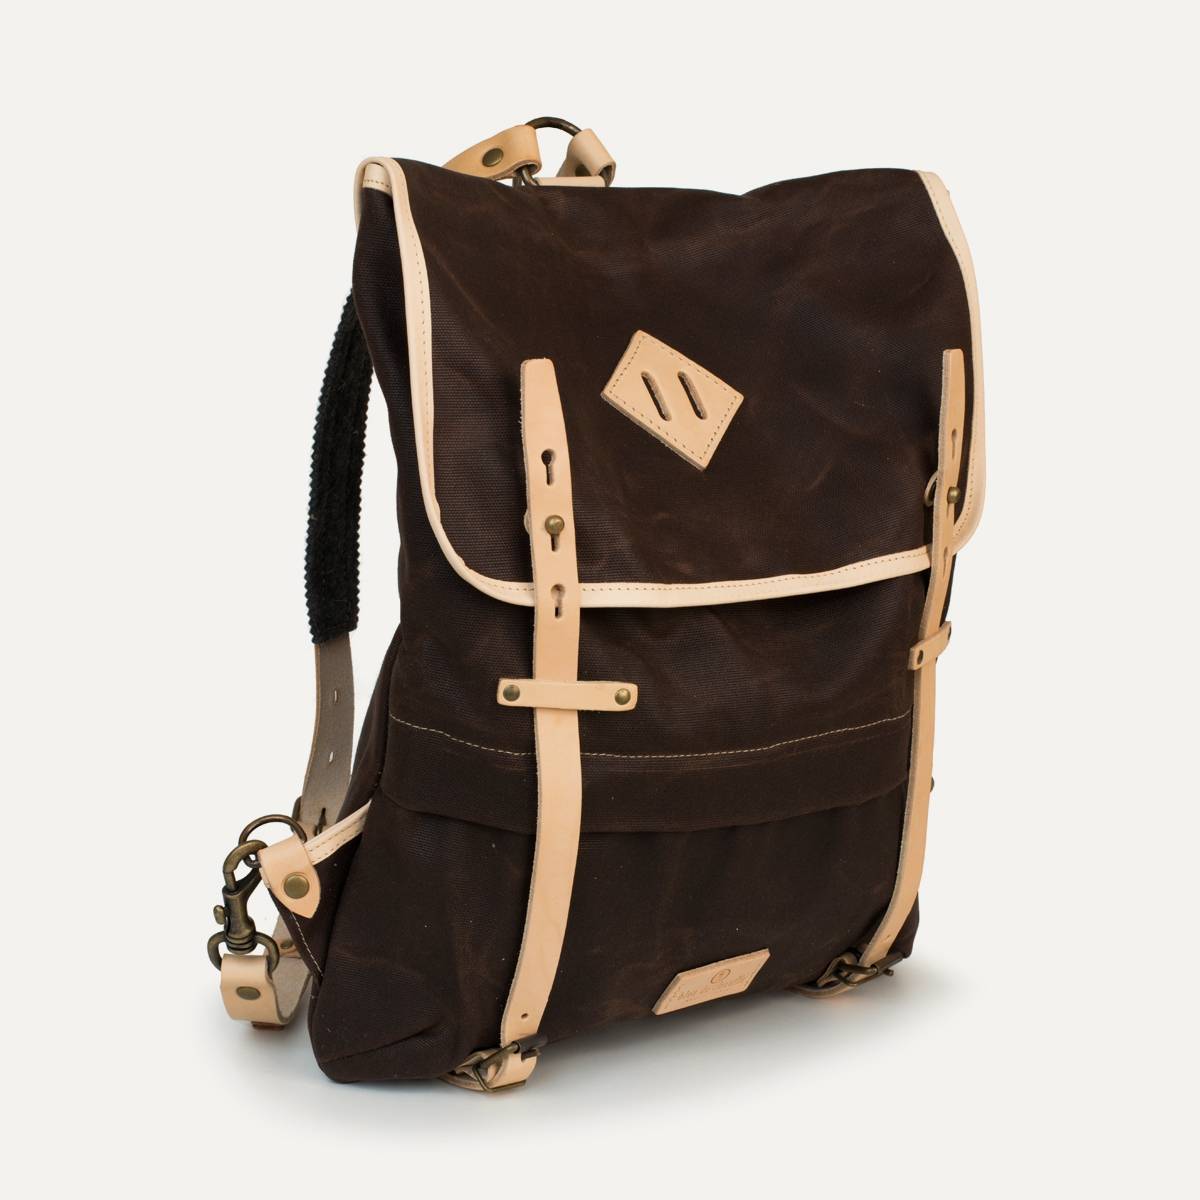 Coursier backpack WAXY - Brown/Natural (image n°1)